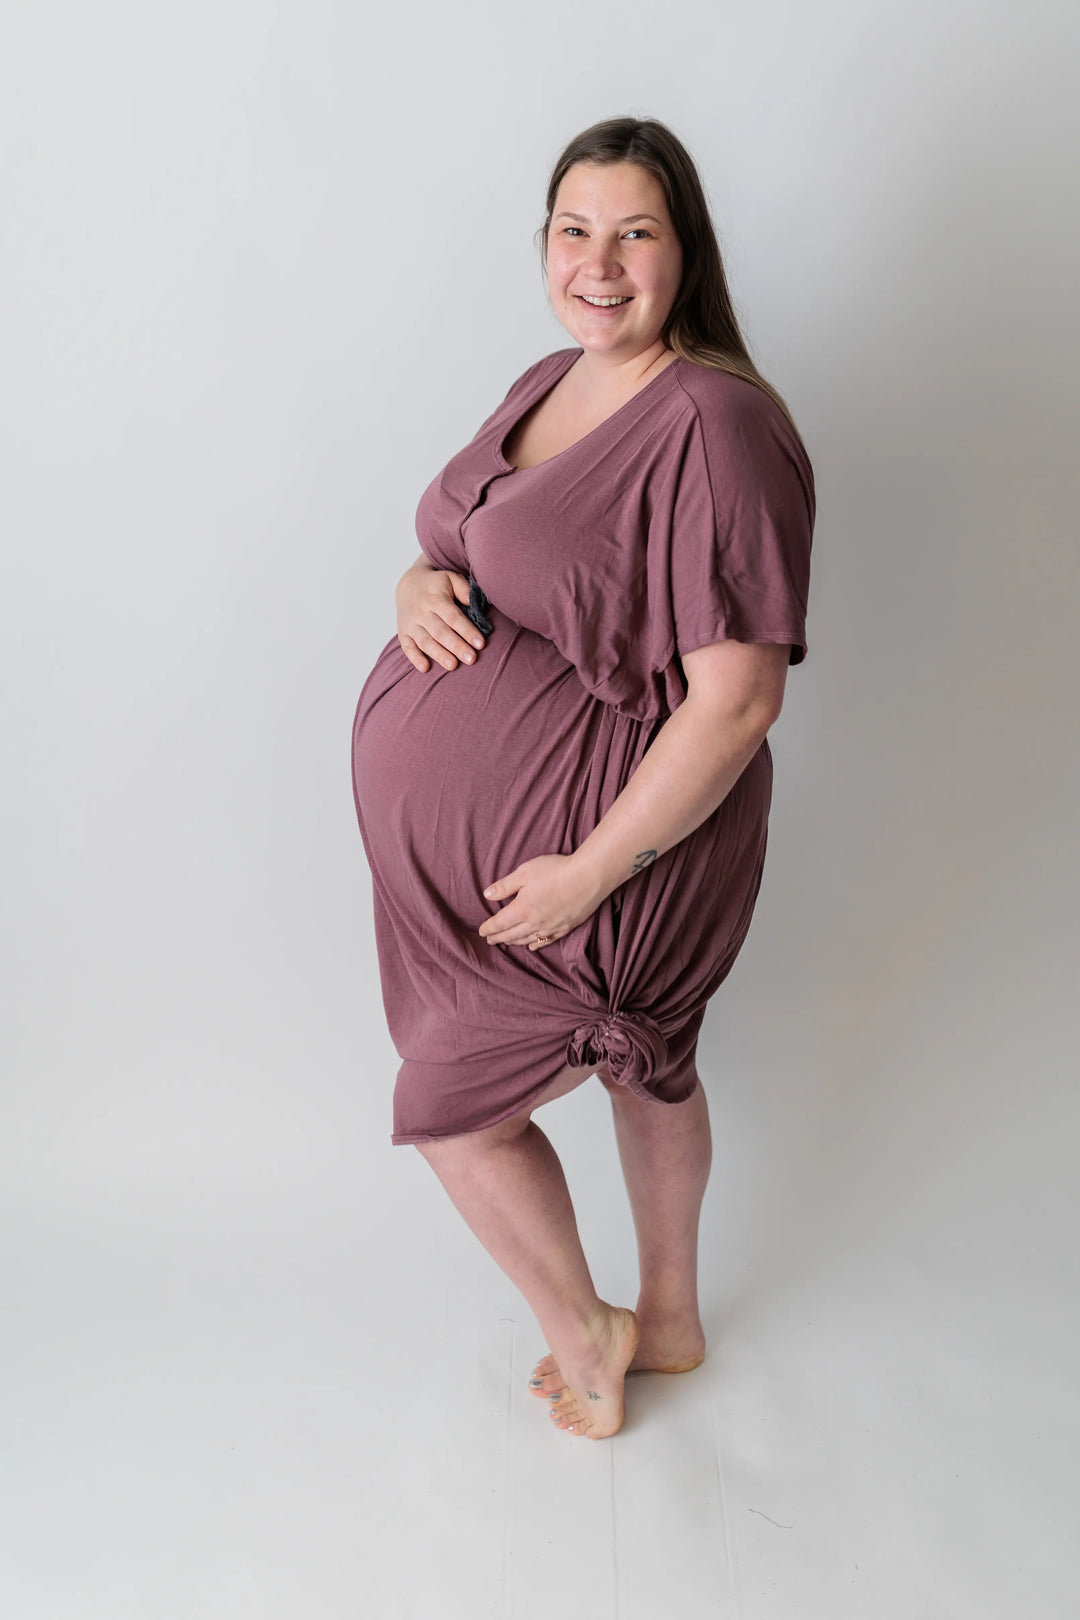 Where to Shop for Maternity Clothes in Canada - Cam & Tay